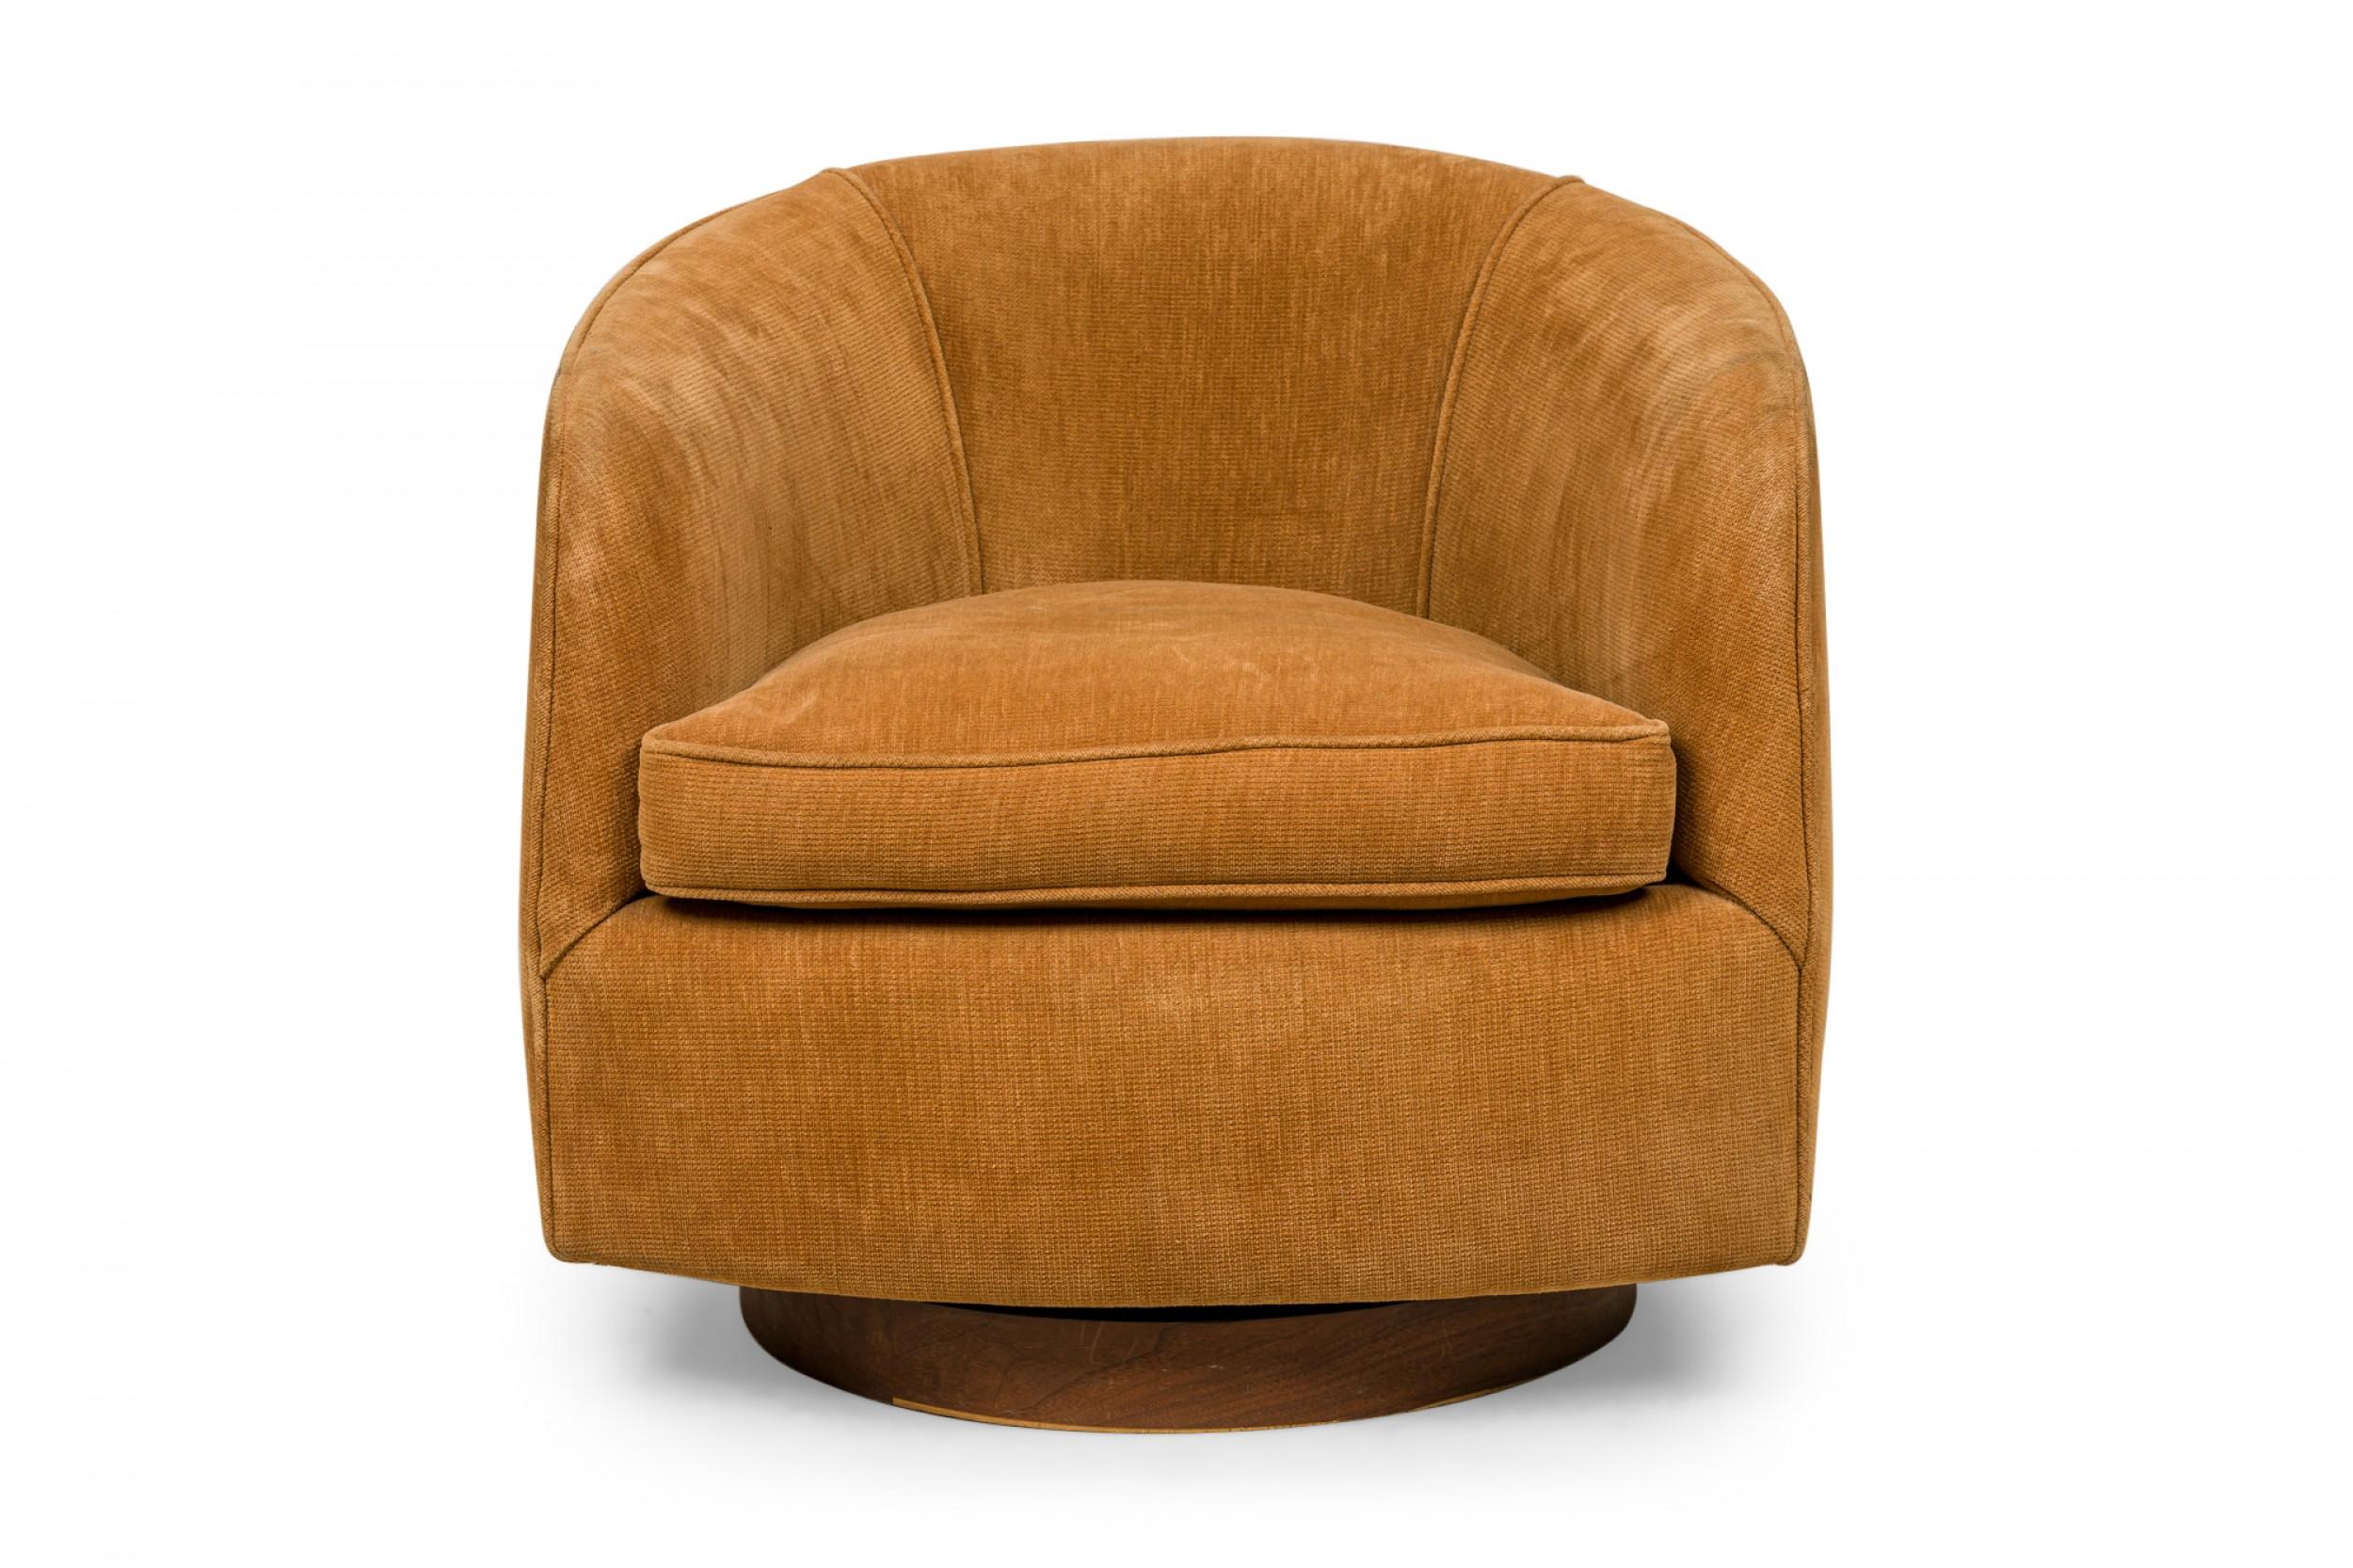 American Mid-Century horseshoe-form lounge / armchair upholstered in light brown velour, resting on a circular wood veneer plinth base. (MILO BAUGHMAN FOR THAYER COGGIN).
 